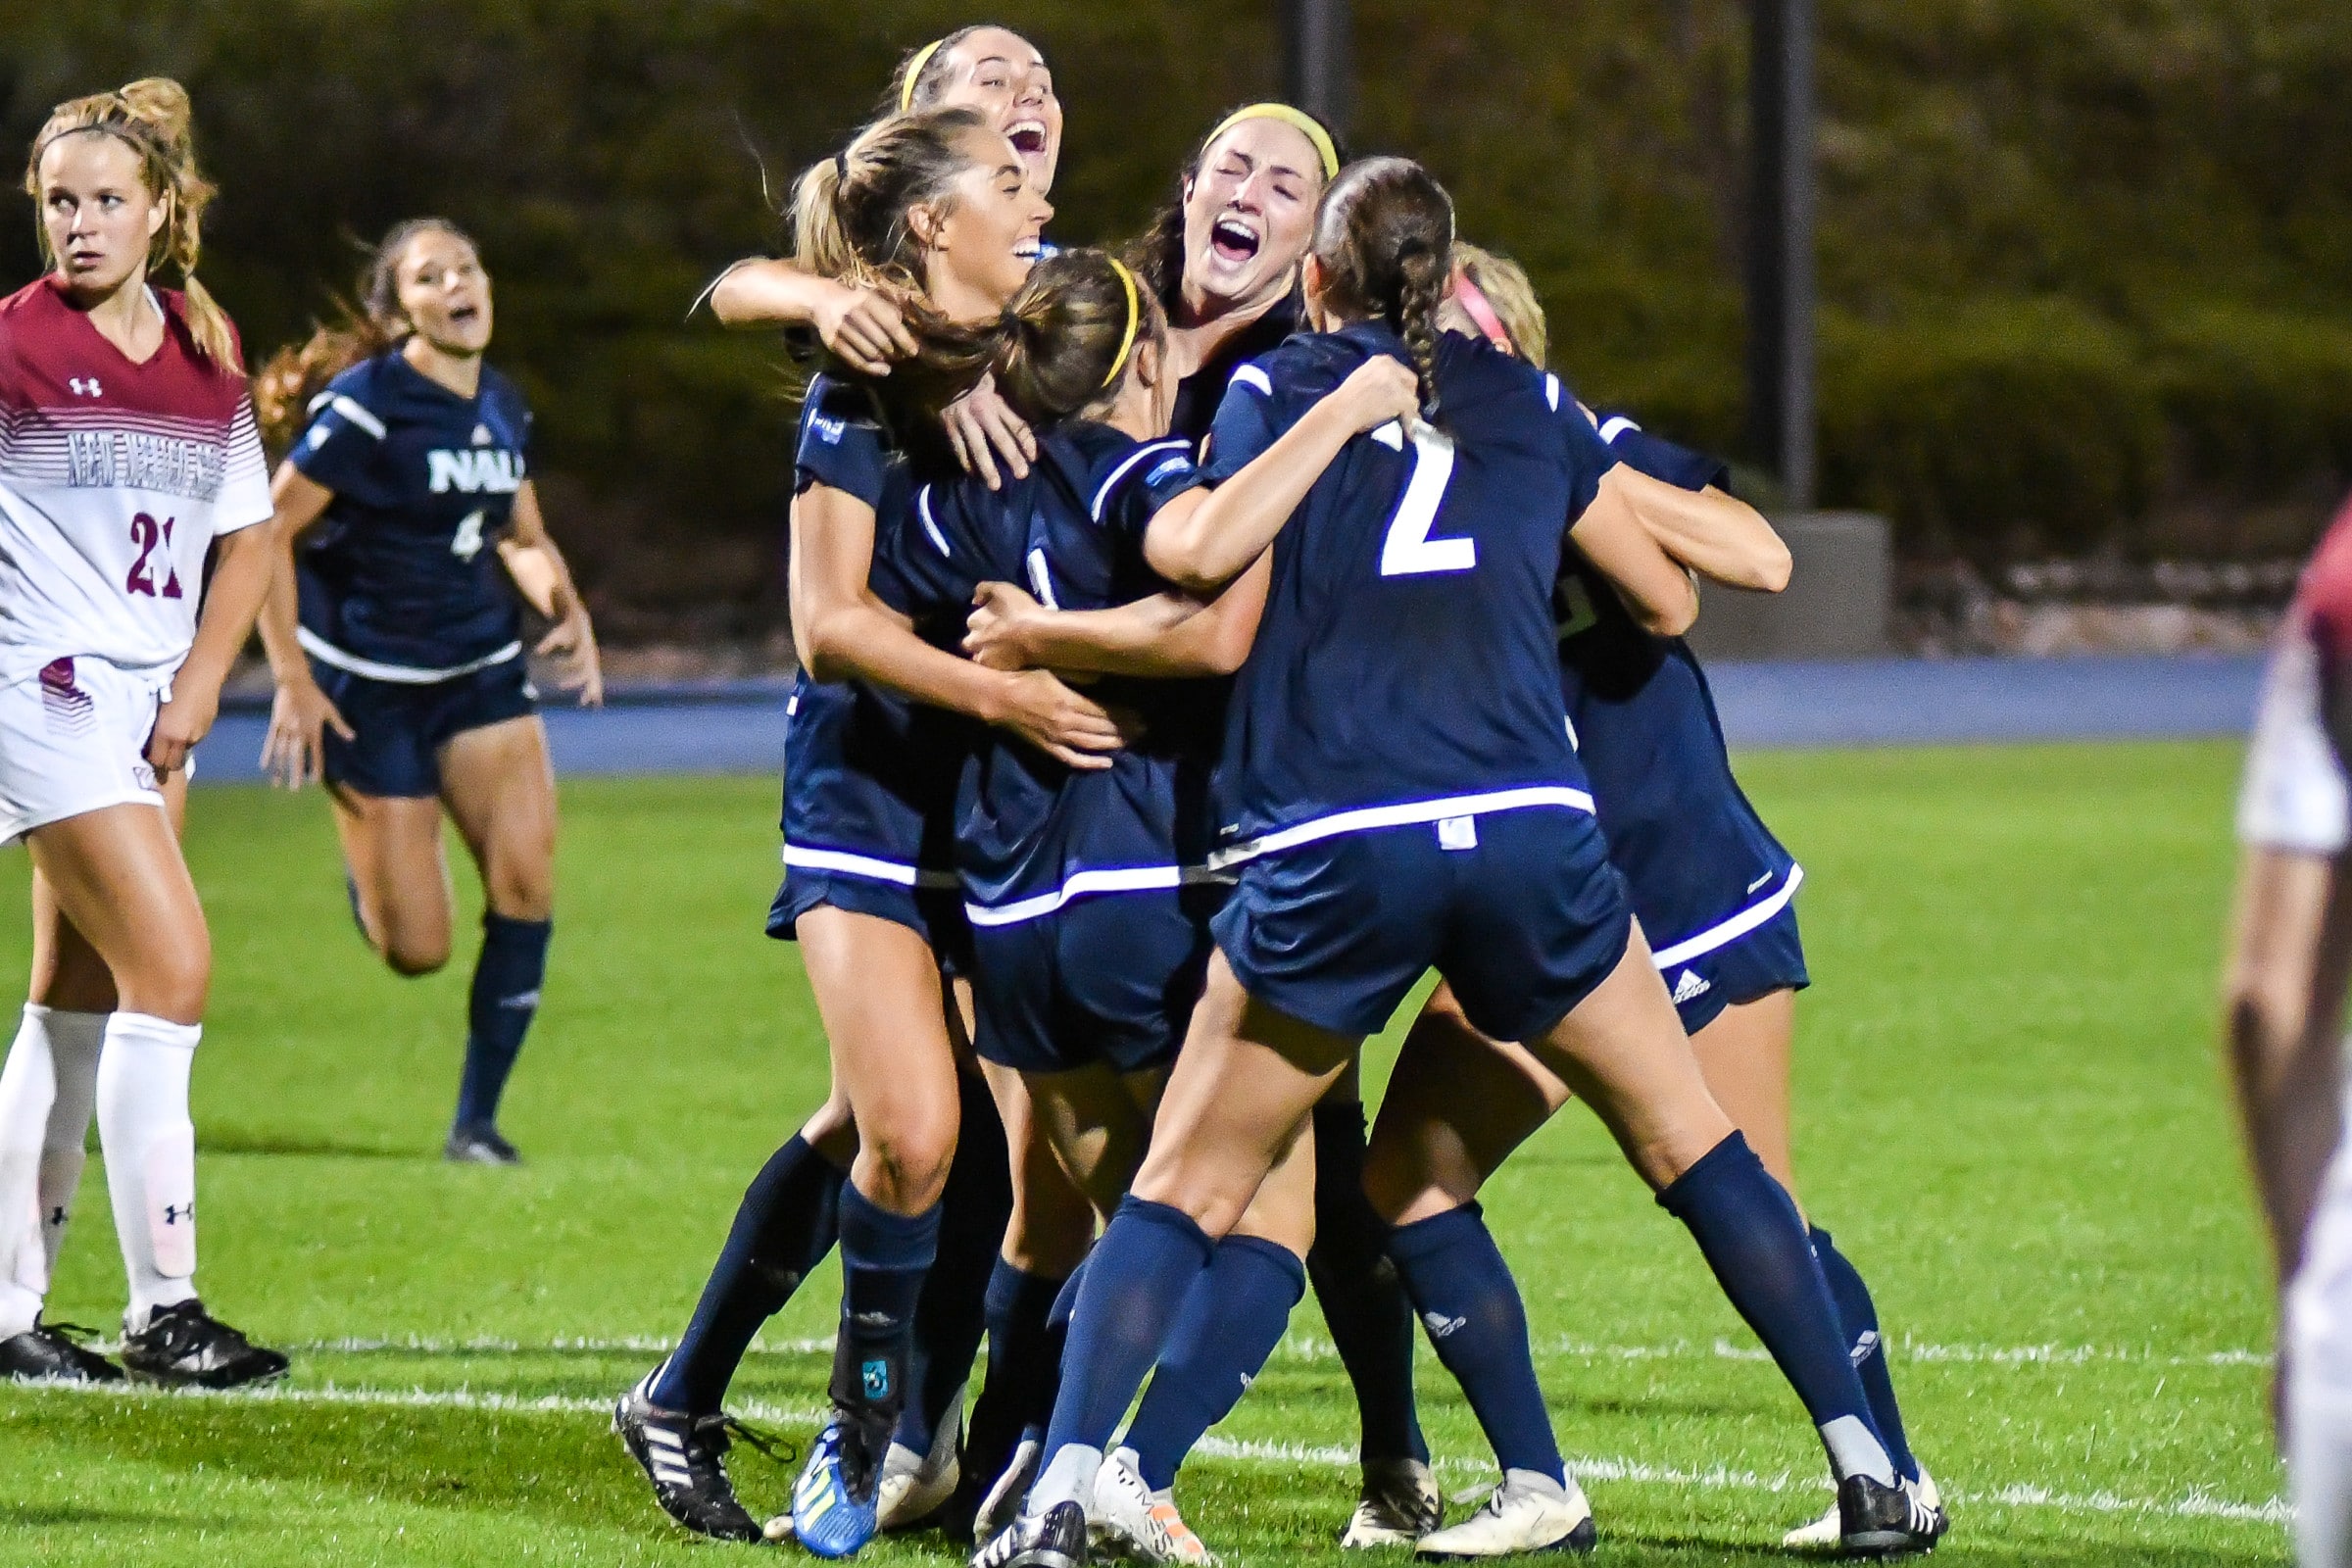 NAU soccer players excitingly hug each other on field.